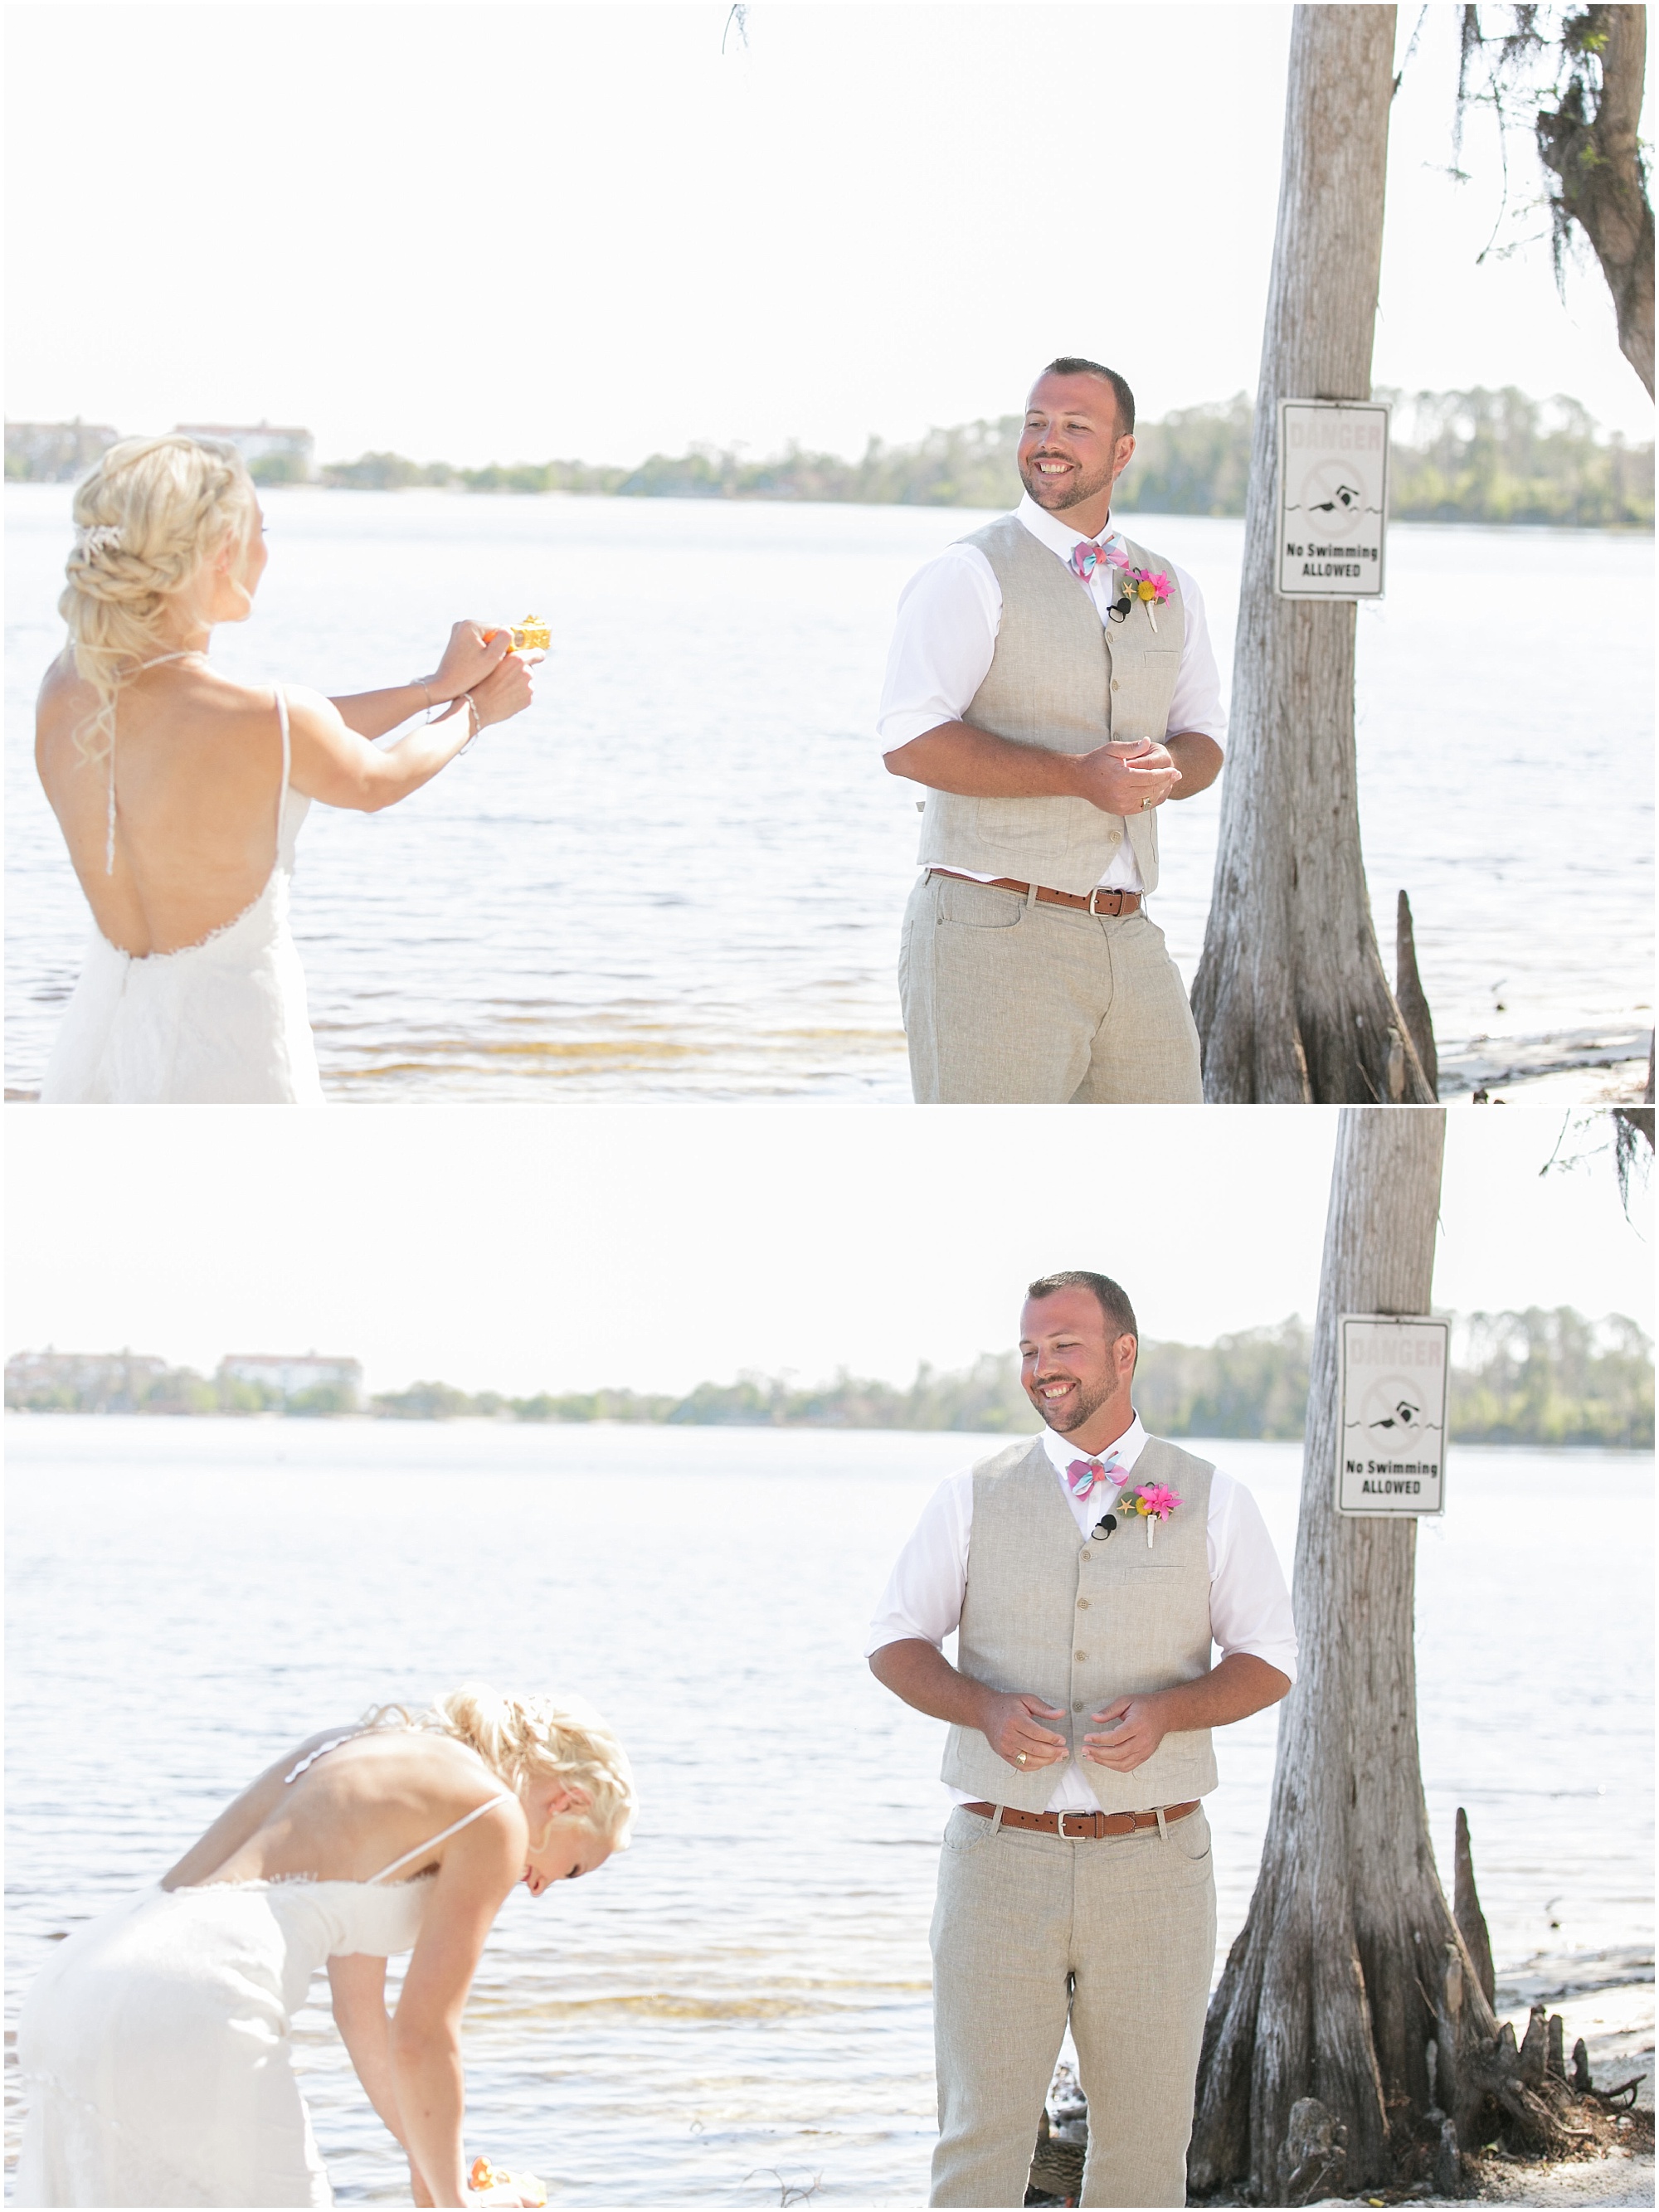 Groom turns around to see his bride for the first time.